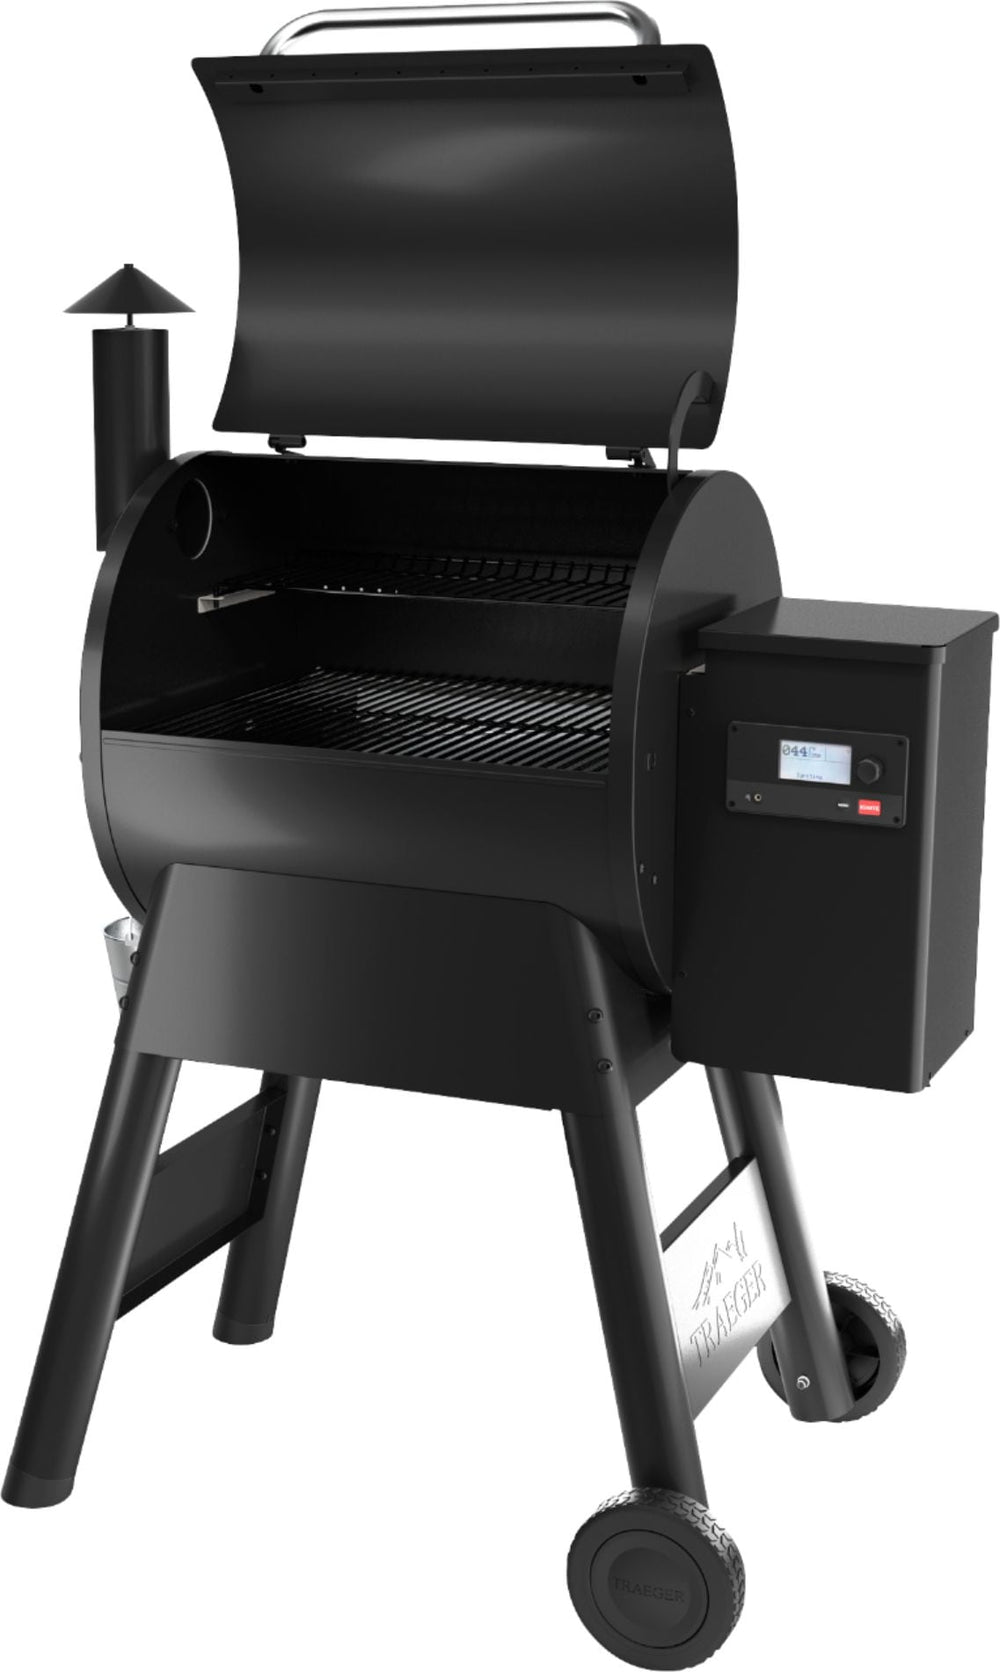 Traeger Grills - Pro 575 with WiFIRE - Black_1